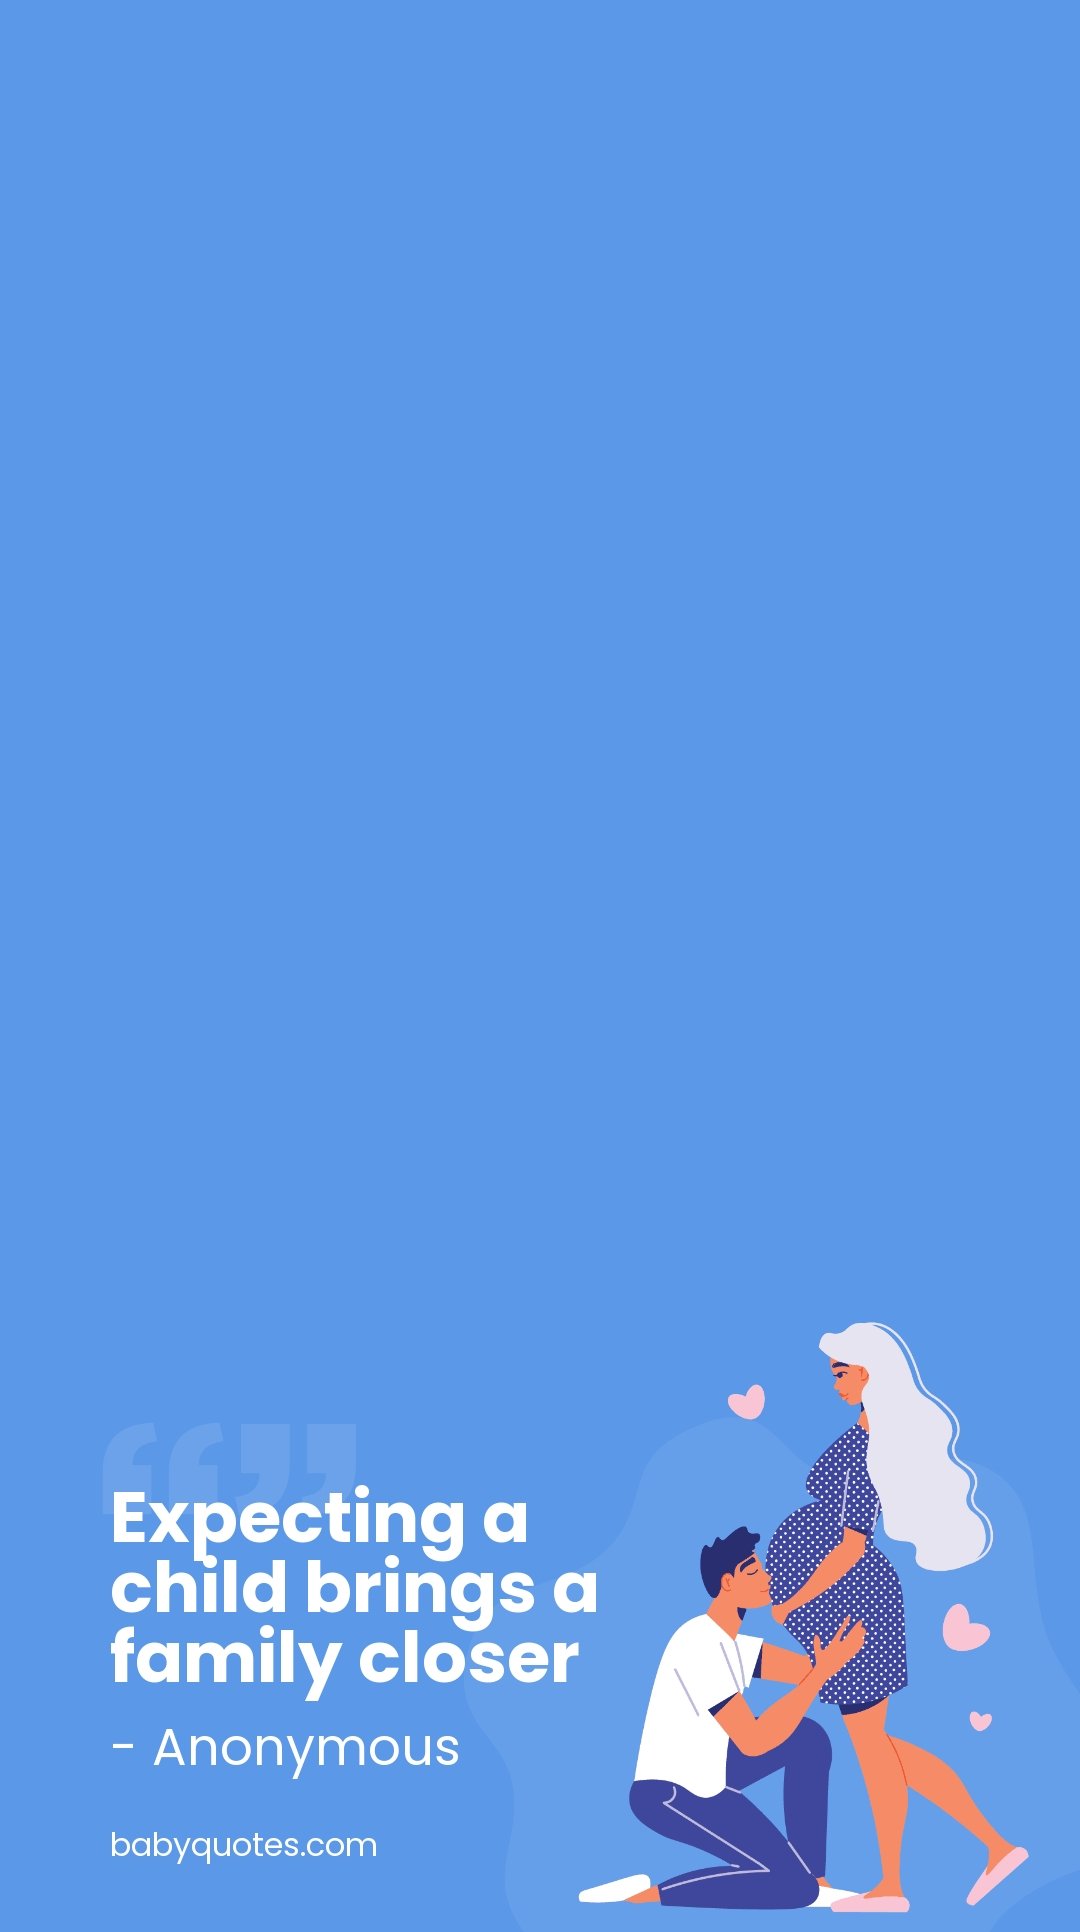 Free Pregnancy Announcement Quote Snapchat Geofilter Template